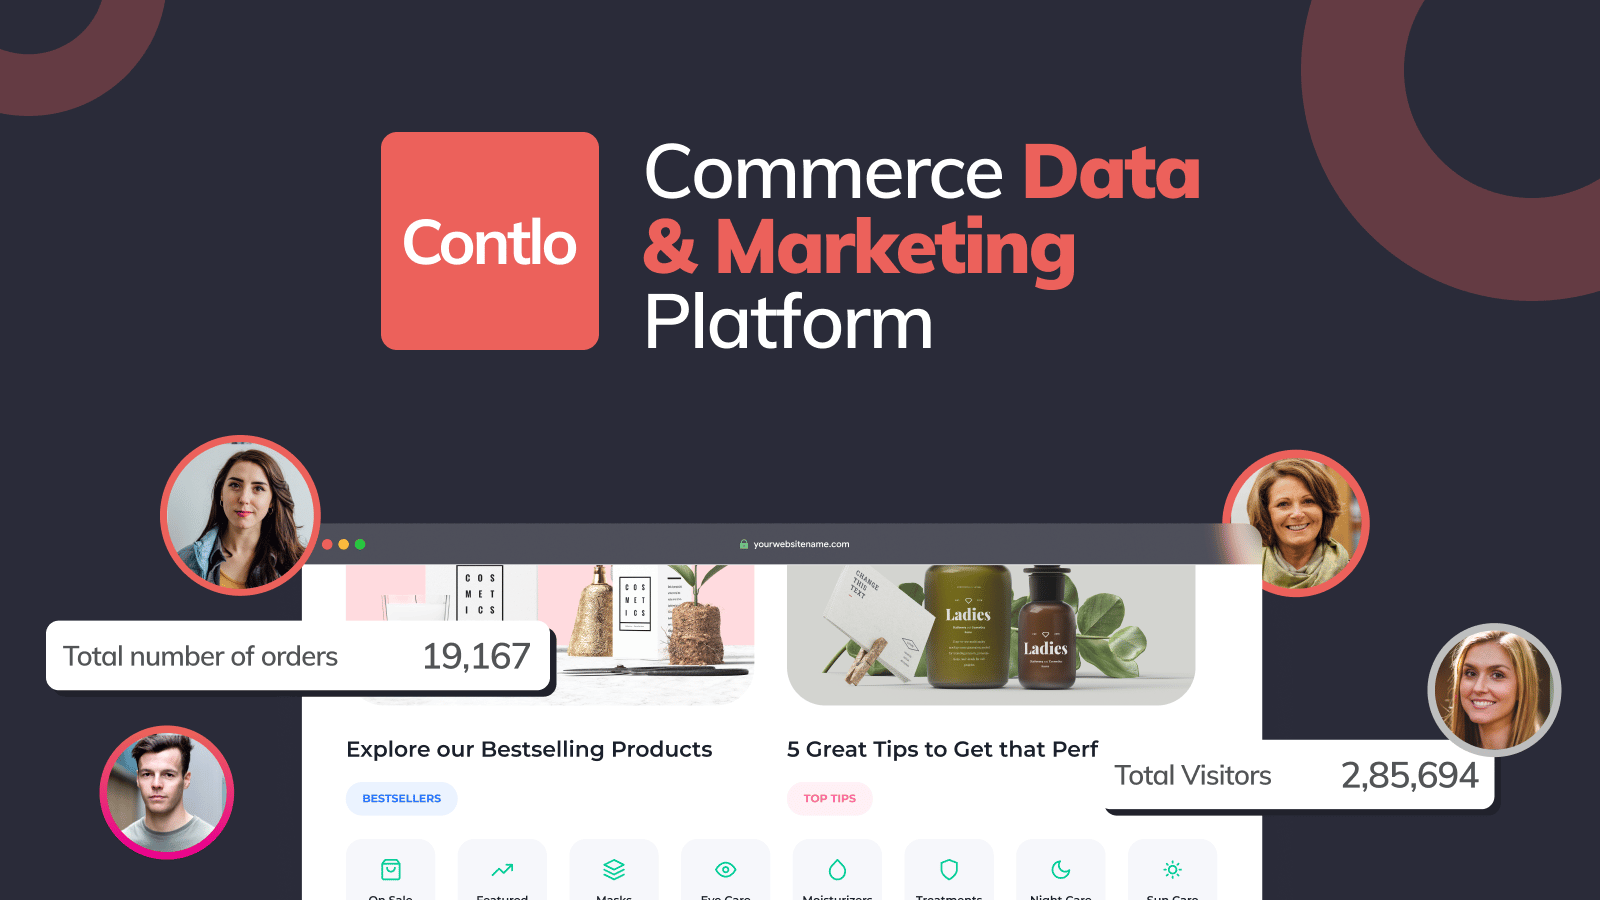 Contlo raises 3.5Mil Seed Funding To Empower Ecommerce Brands